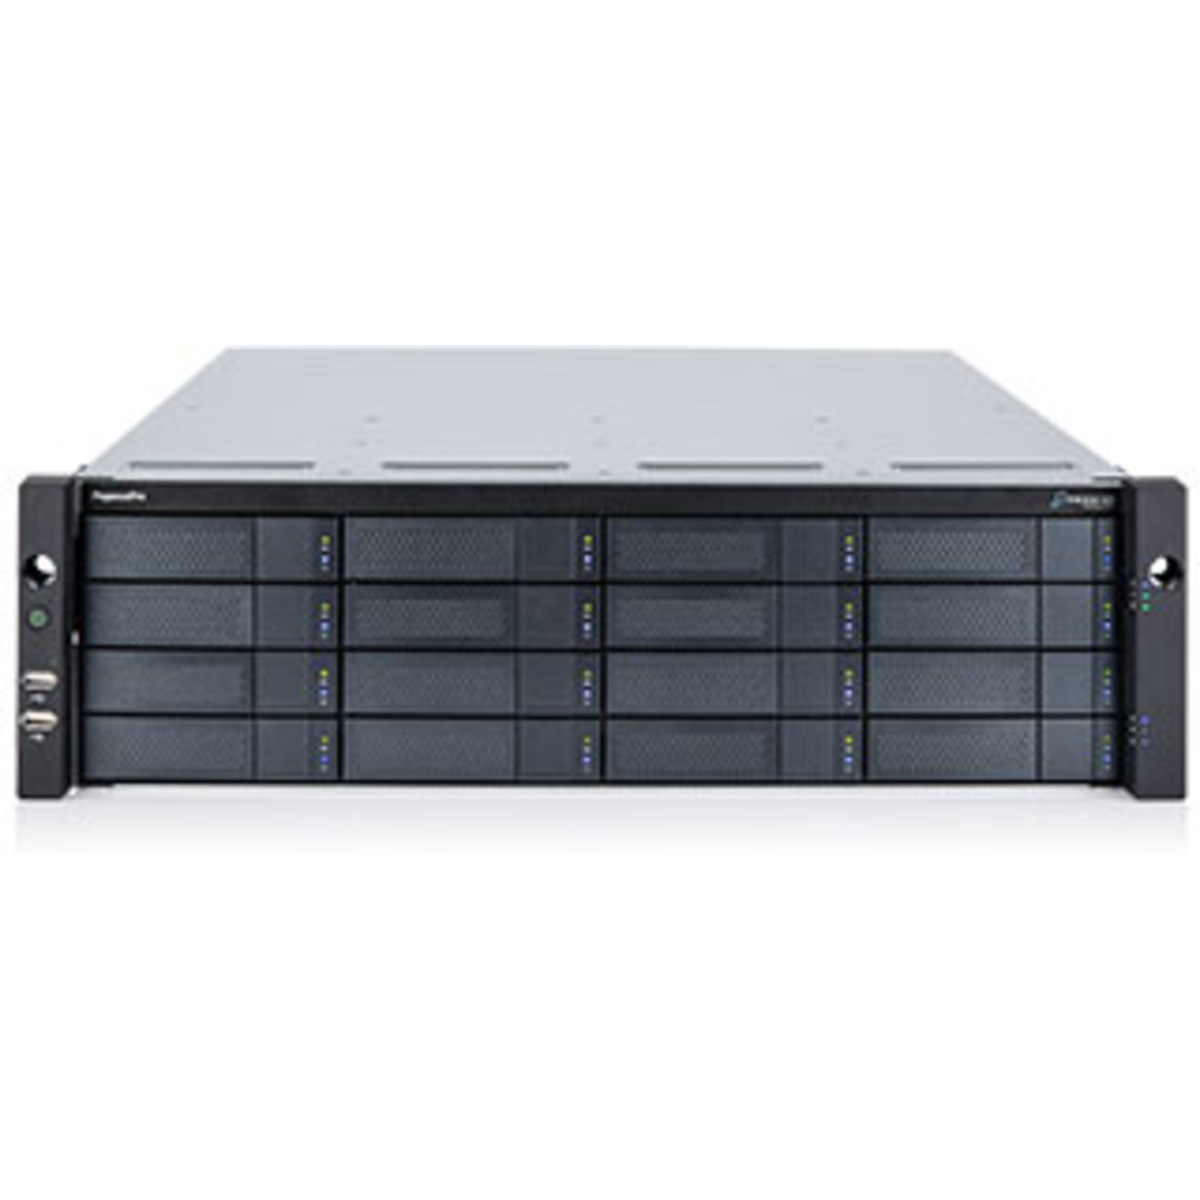 Promise Technology PegasusPro R16 80tb 16-Bay RackMount Multimedia / Power User / Business DAS-NAS - Combo Direct + Network Storage Device 10x8tb Seagate BarraCuda ST8000DM004 3.5 5400rpm SATA 6Gb/s HDD CONSUMER Class Drives Installed - Burn-In Tested PegasusPro R16